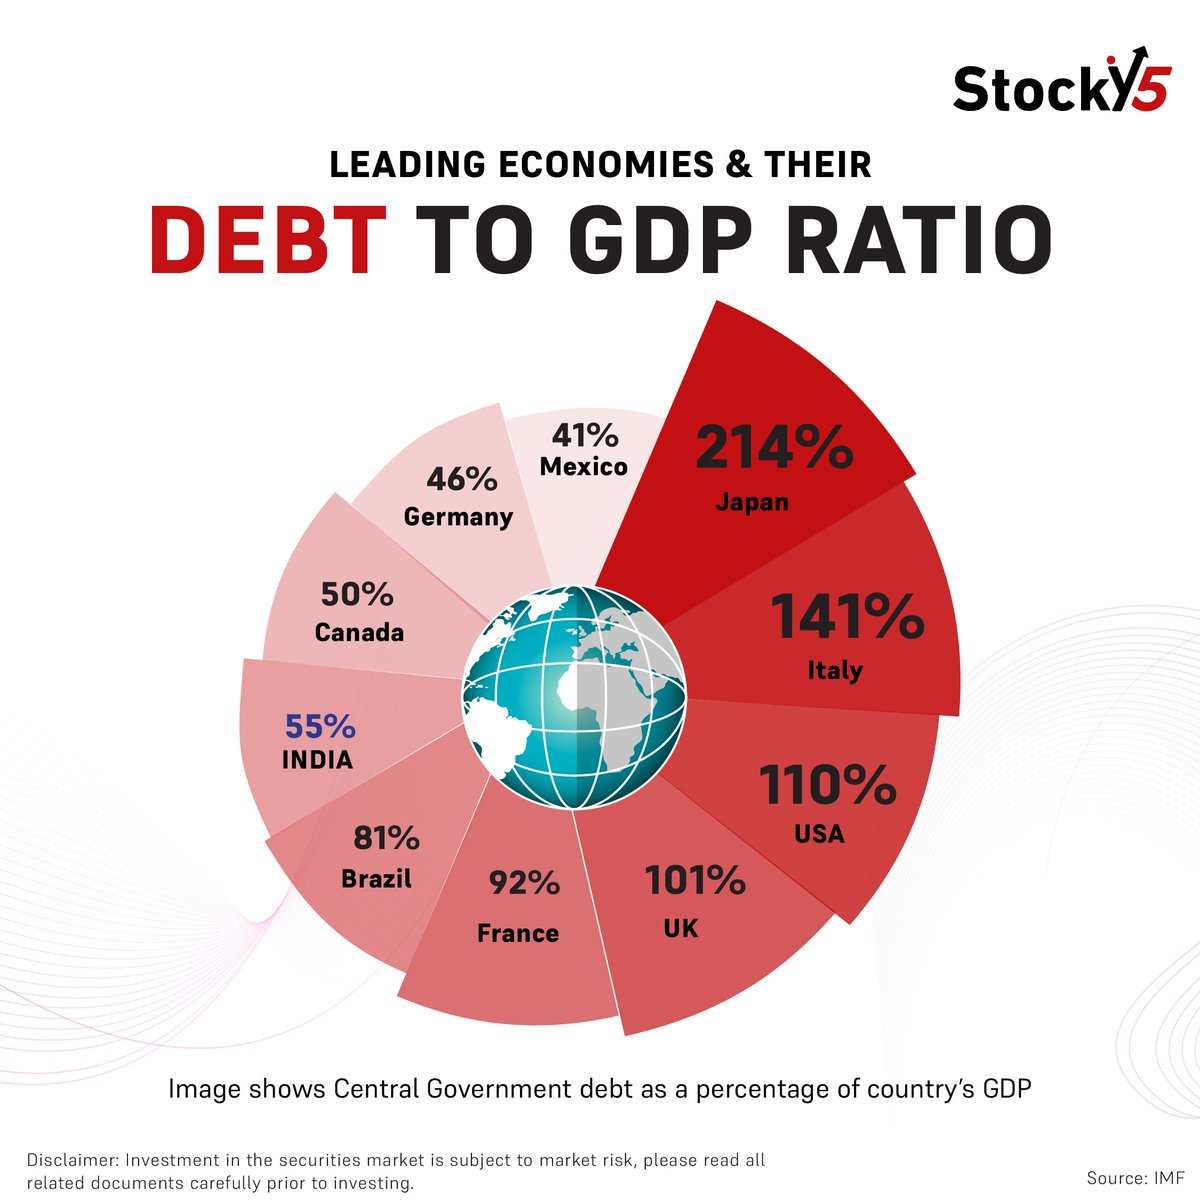 Explore the Debt-to-GDP ratio in leading economies: What lies ahead for economic growth?

Let's discuss below.

#Stocky5 #Community #GDP #Marketbuzz #economic #growth